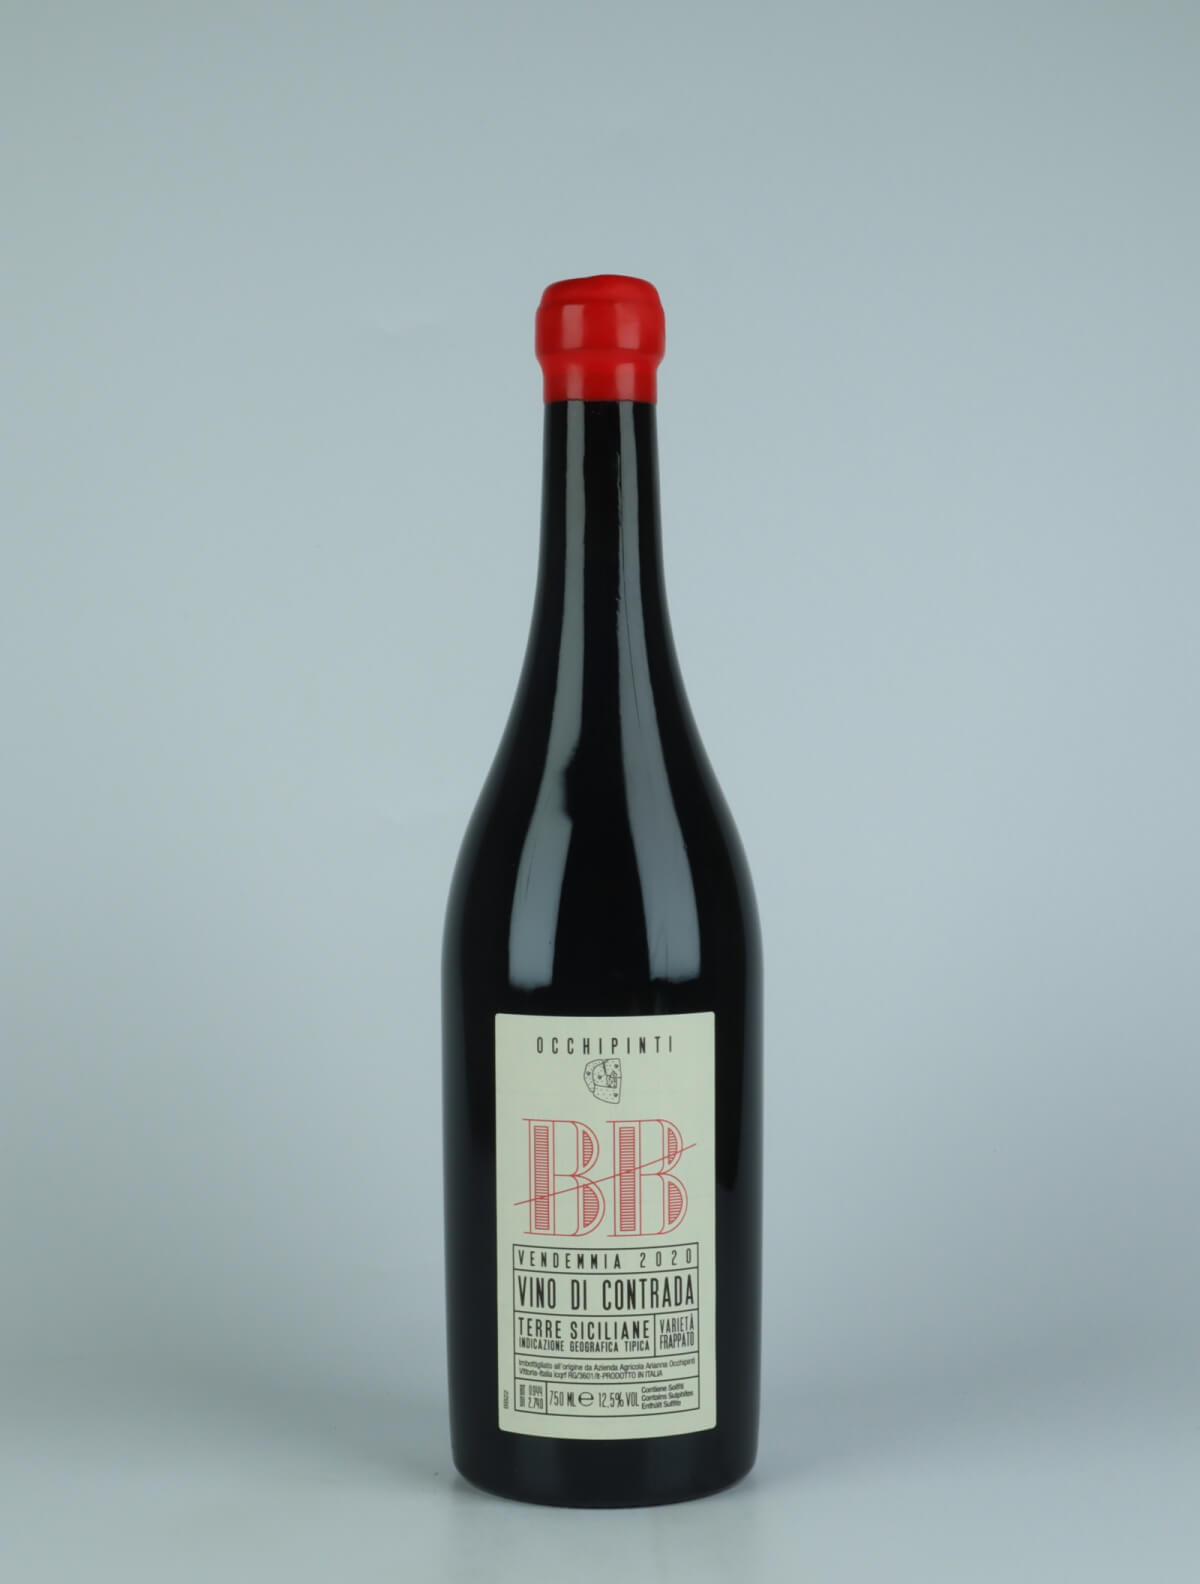 A bottle 2020 Bombolieri Red wine from Arianna Occhipinti, Sicily in Italy